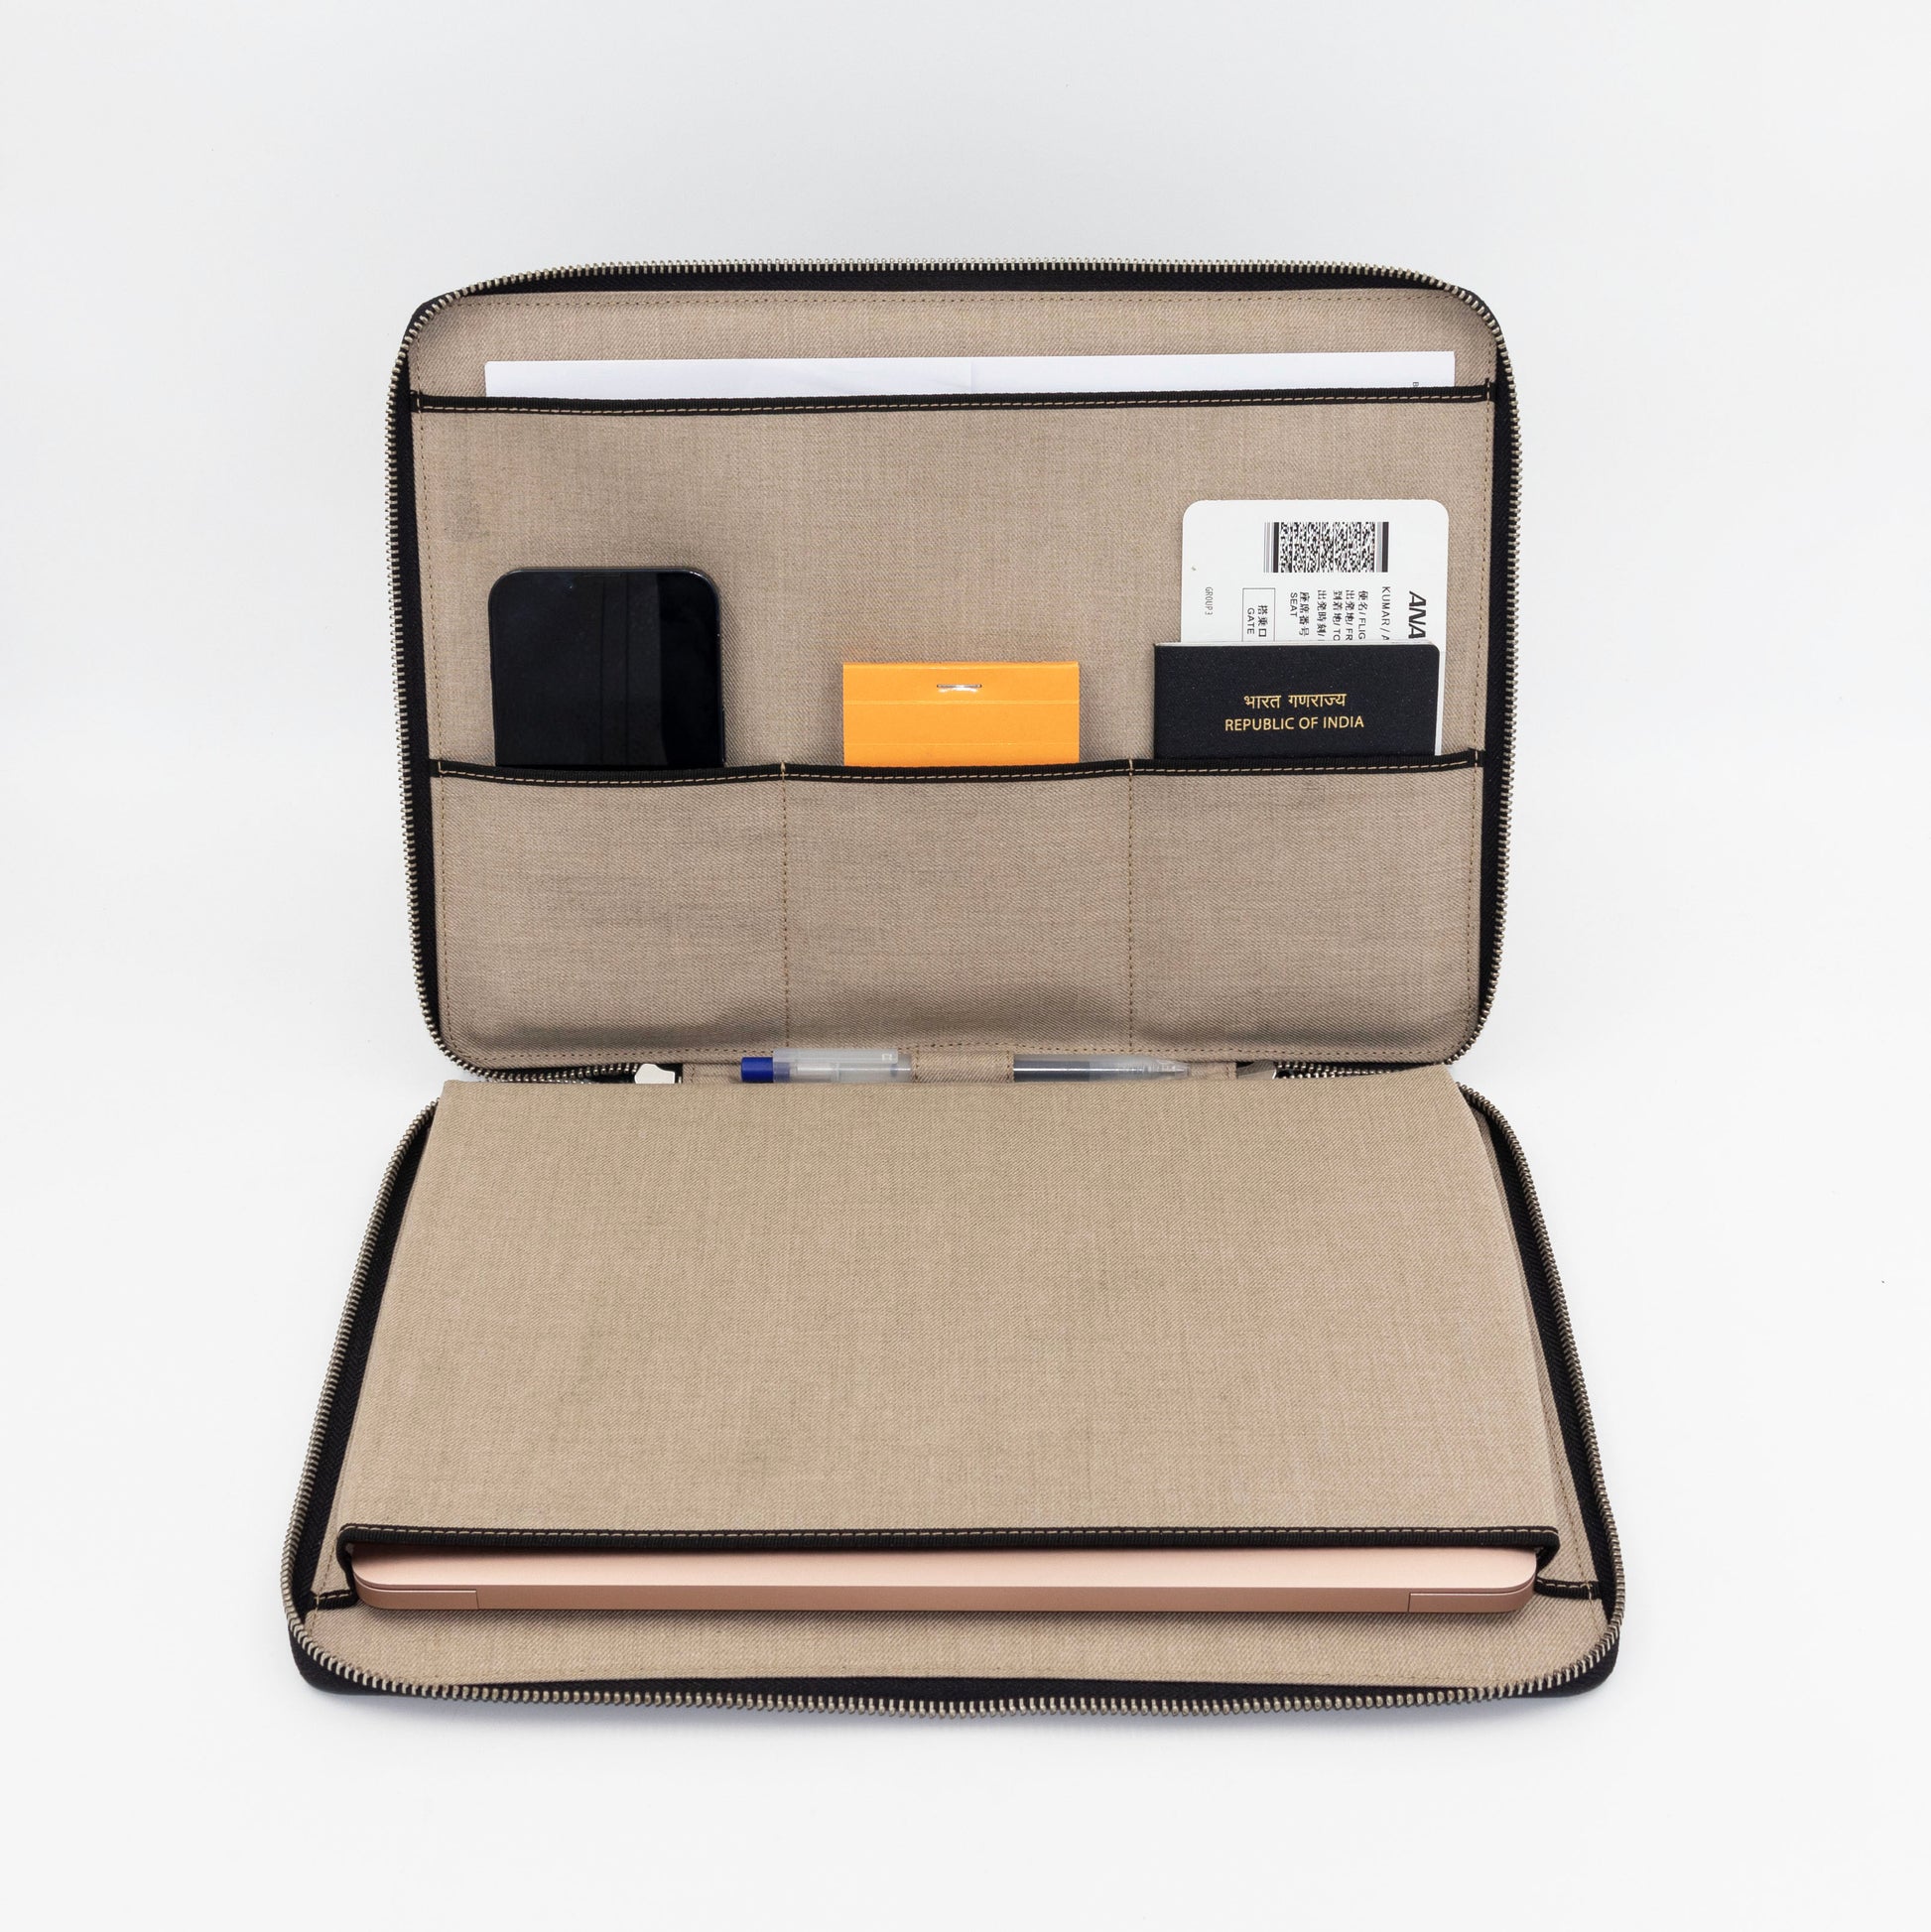 A laptop case to carry your MacBook Pro, documents and commonly used items.